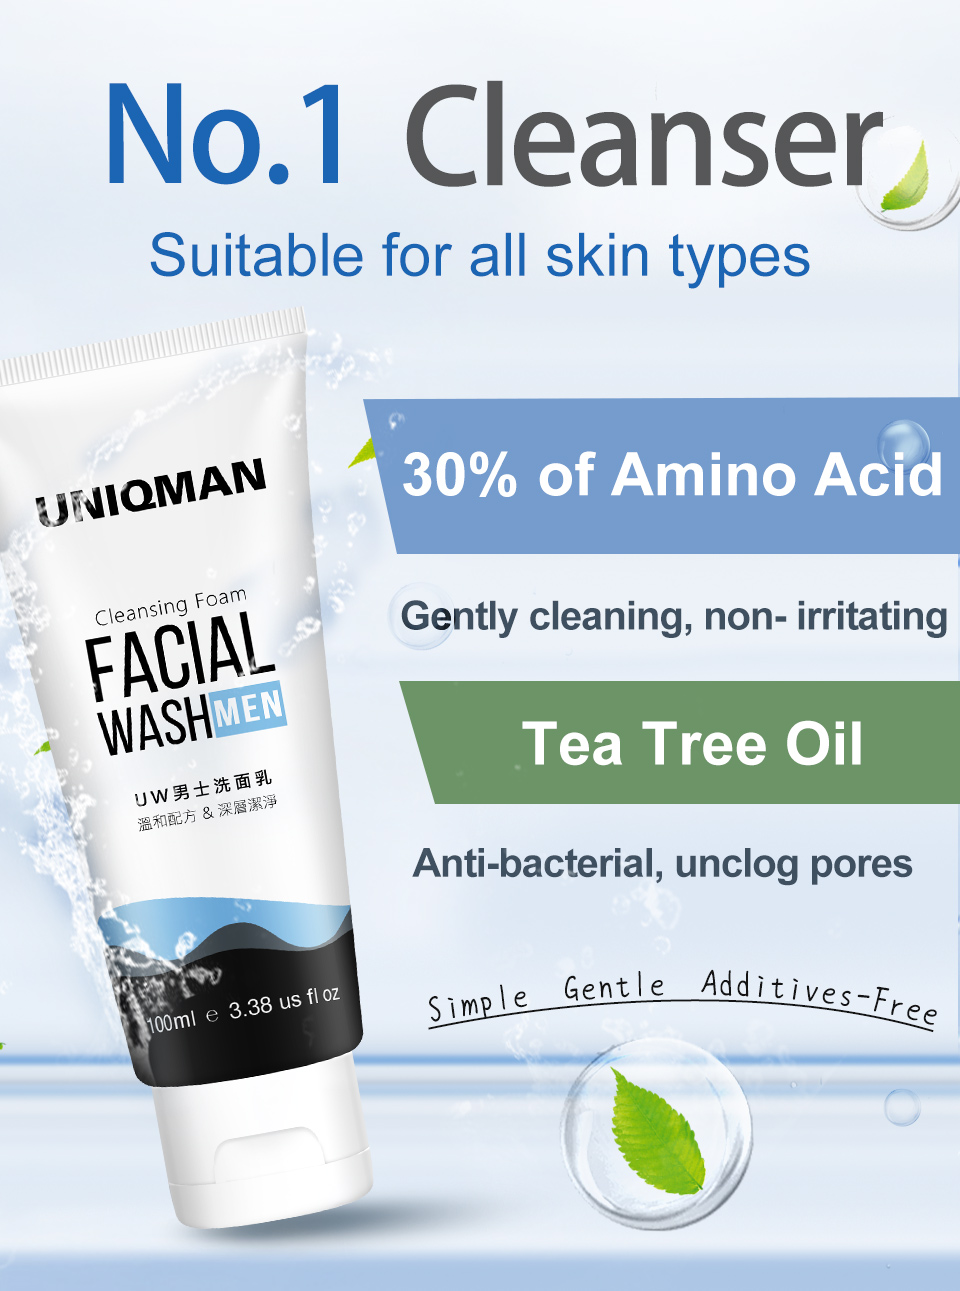 Suitable for all type of skin, especially those with dry, oily, and combination skin